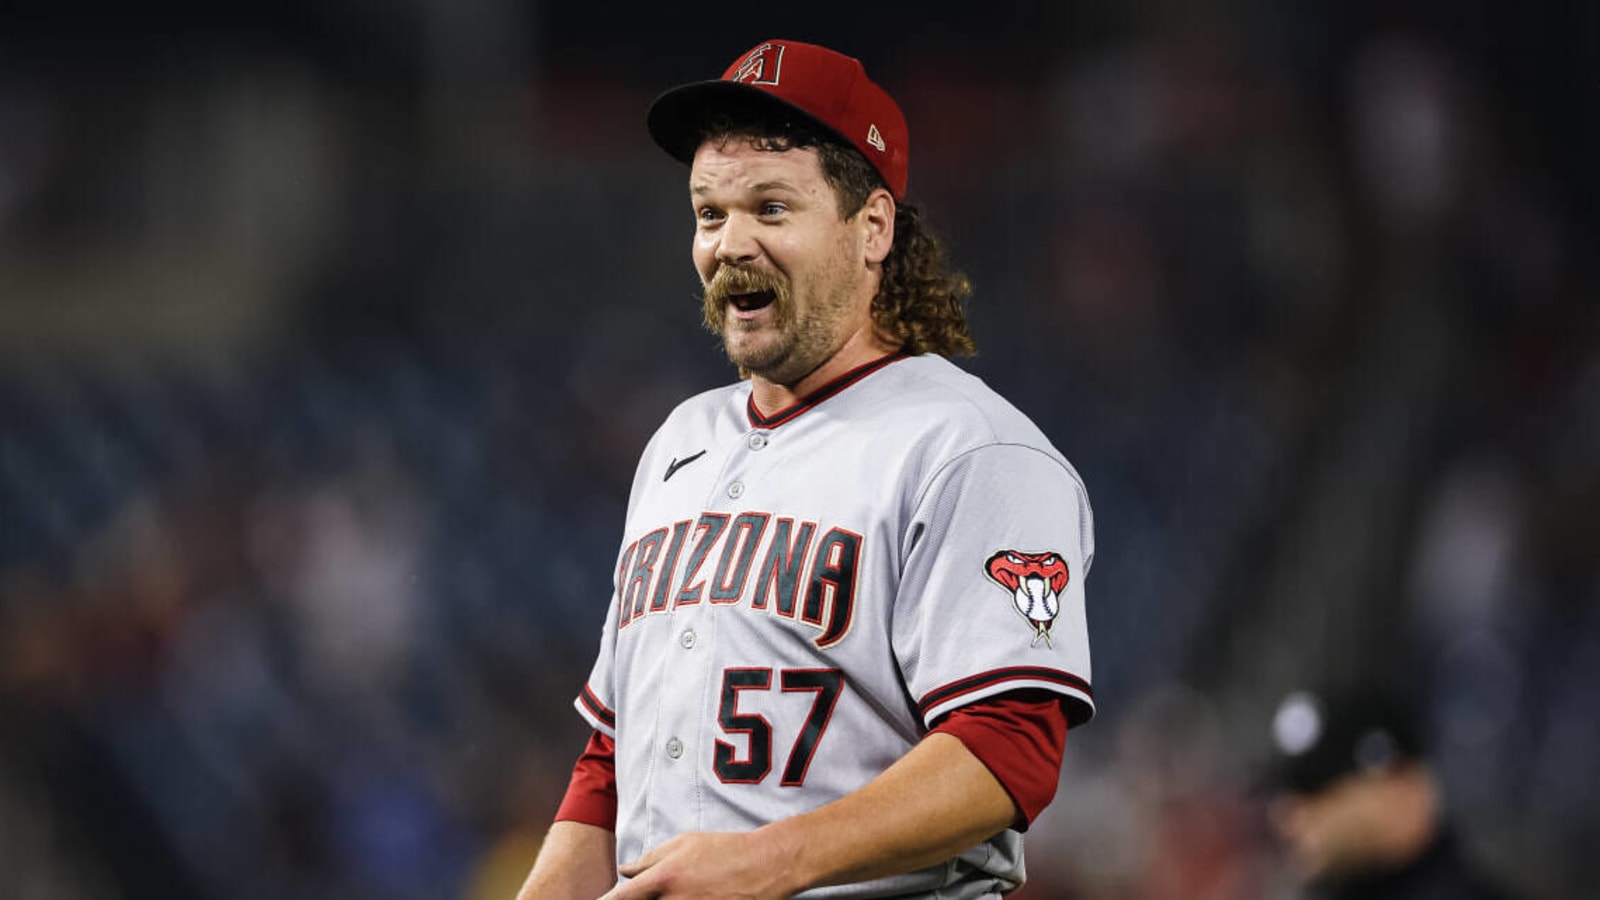 Trade Deadline Acquisition Andrew Chafin Endears Himself to Milwaukee Brewers Fans